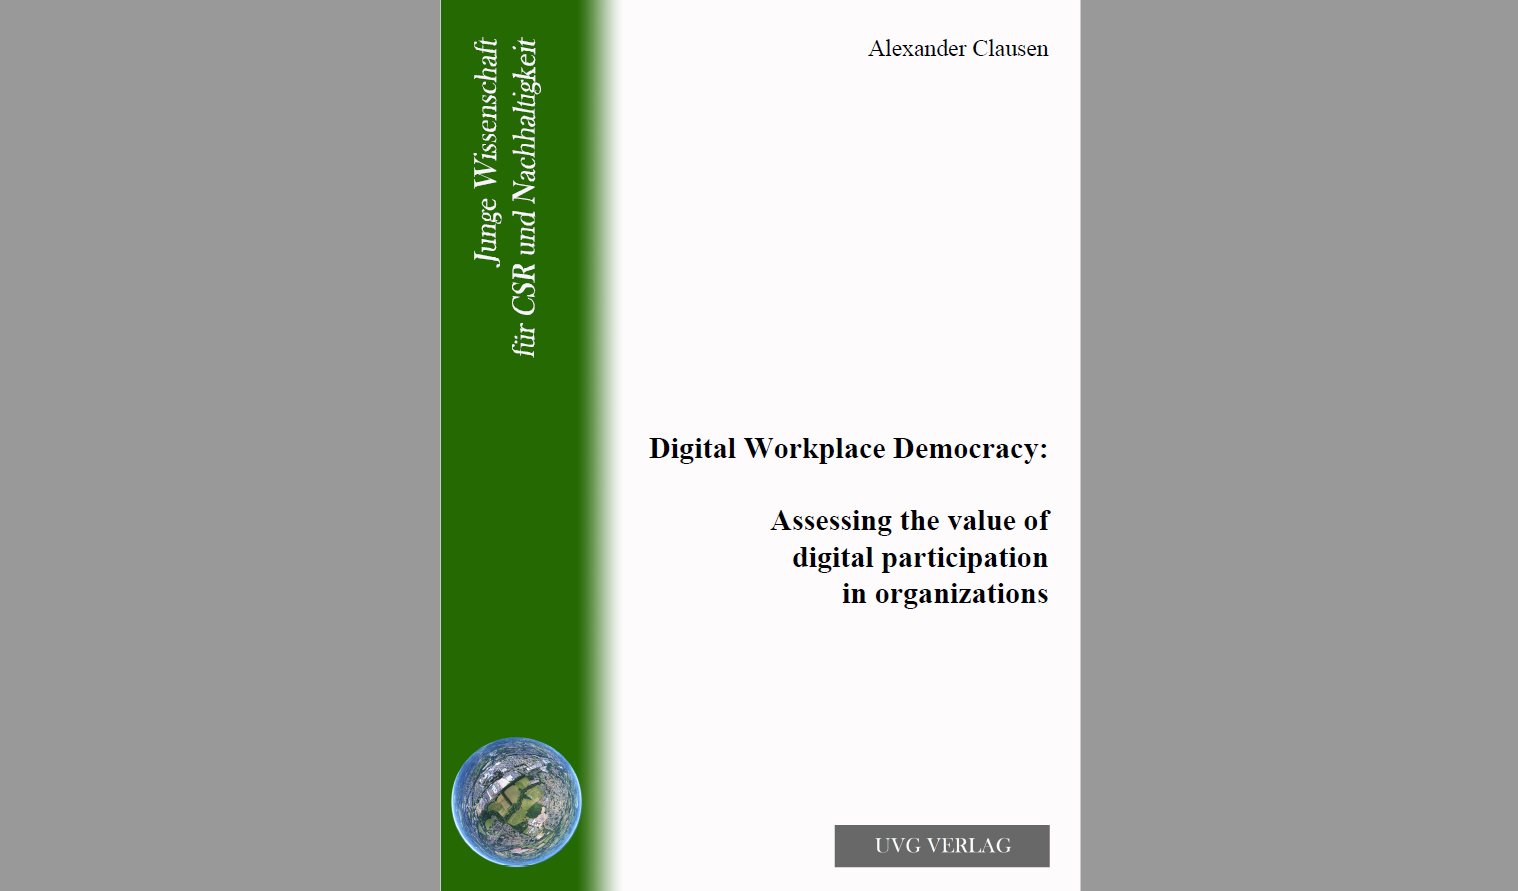 Digital Workplace Democracy: Assessing the value of digital participation in organizations